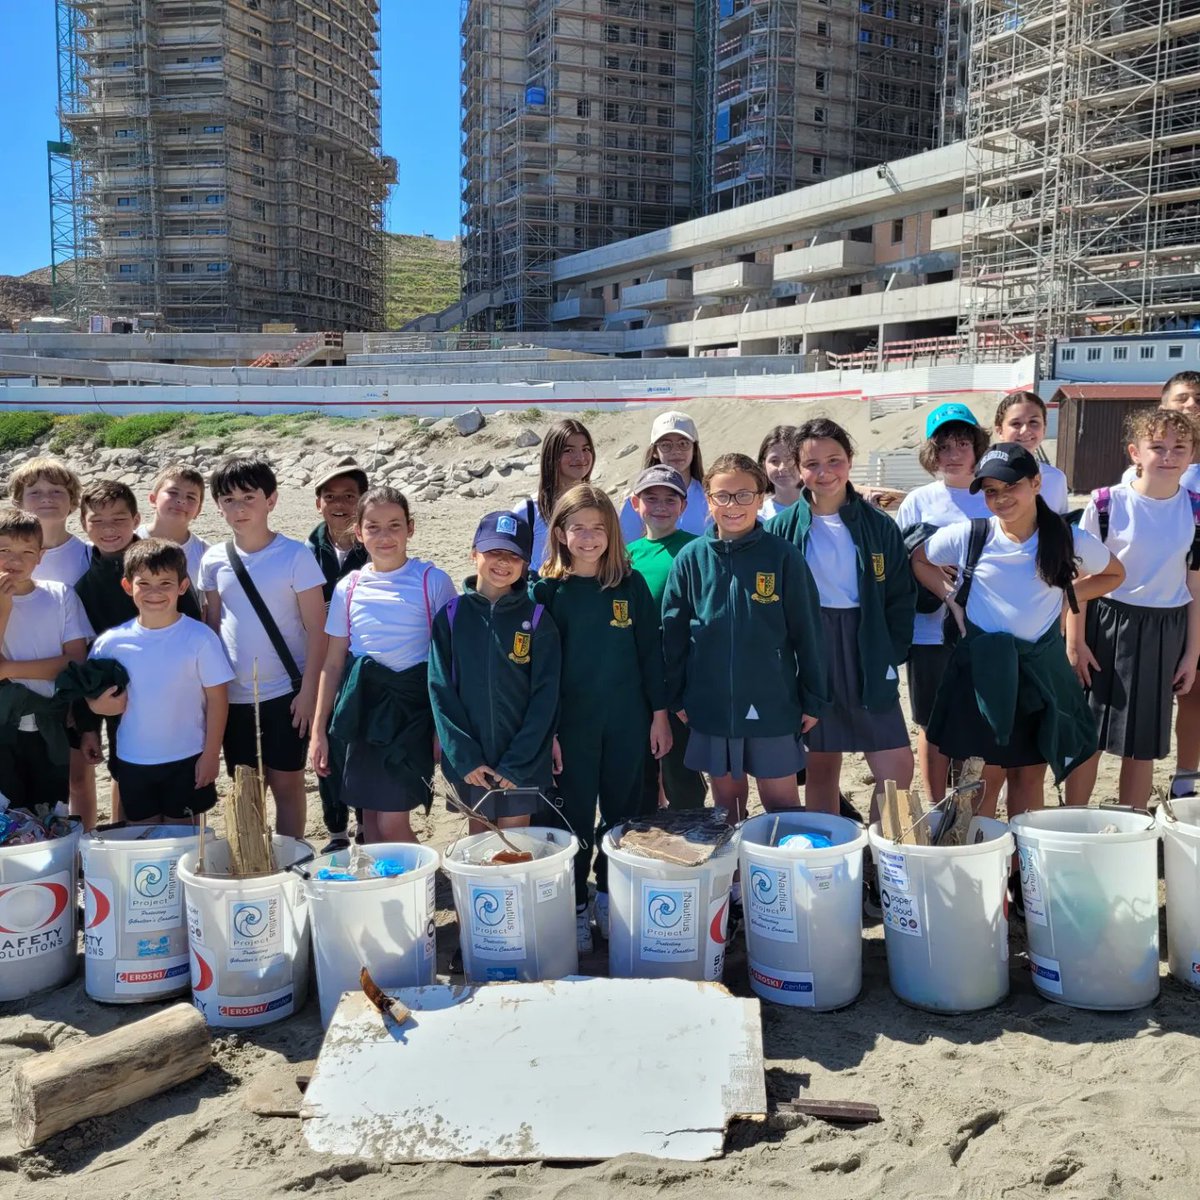 83rd #GreatGibraltarBeachClean BFUPS pupils remove 65kg of #plasticpollution Chances are this rubbish would have ended up in the ocean #MedOceanHeroes Seth & Malcolm received the #CustodiansOfTheBay accolade on behalf of the school We are strongest when we work together!